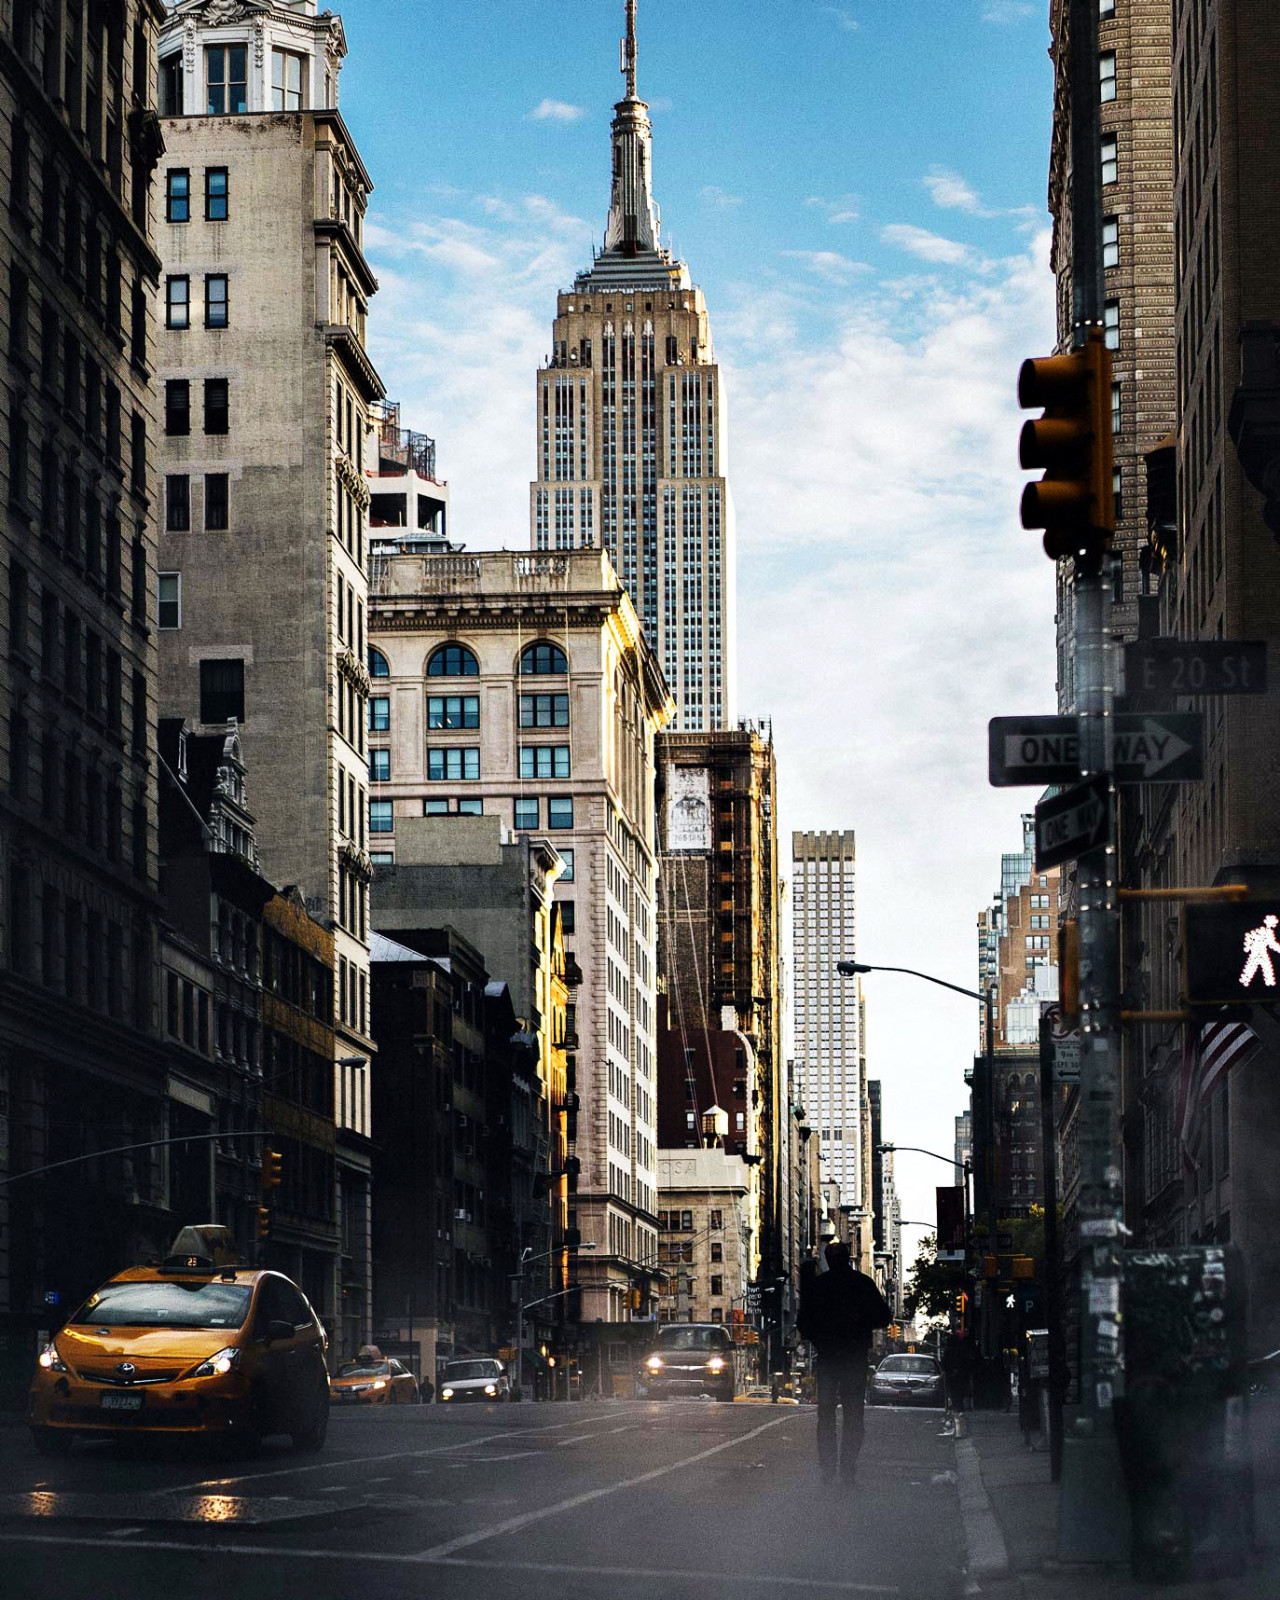 [[MORE]] 100 Most Fascinating Facts About the Empire State Building
• The Empire State Building, located in the heart of Manhattan, New York City, is an iconic skyscraper and one of the most famous landmarks in the world.
• Construction of the Empire...